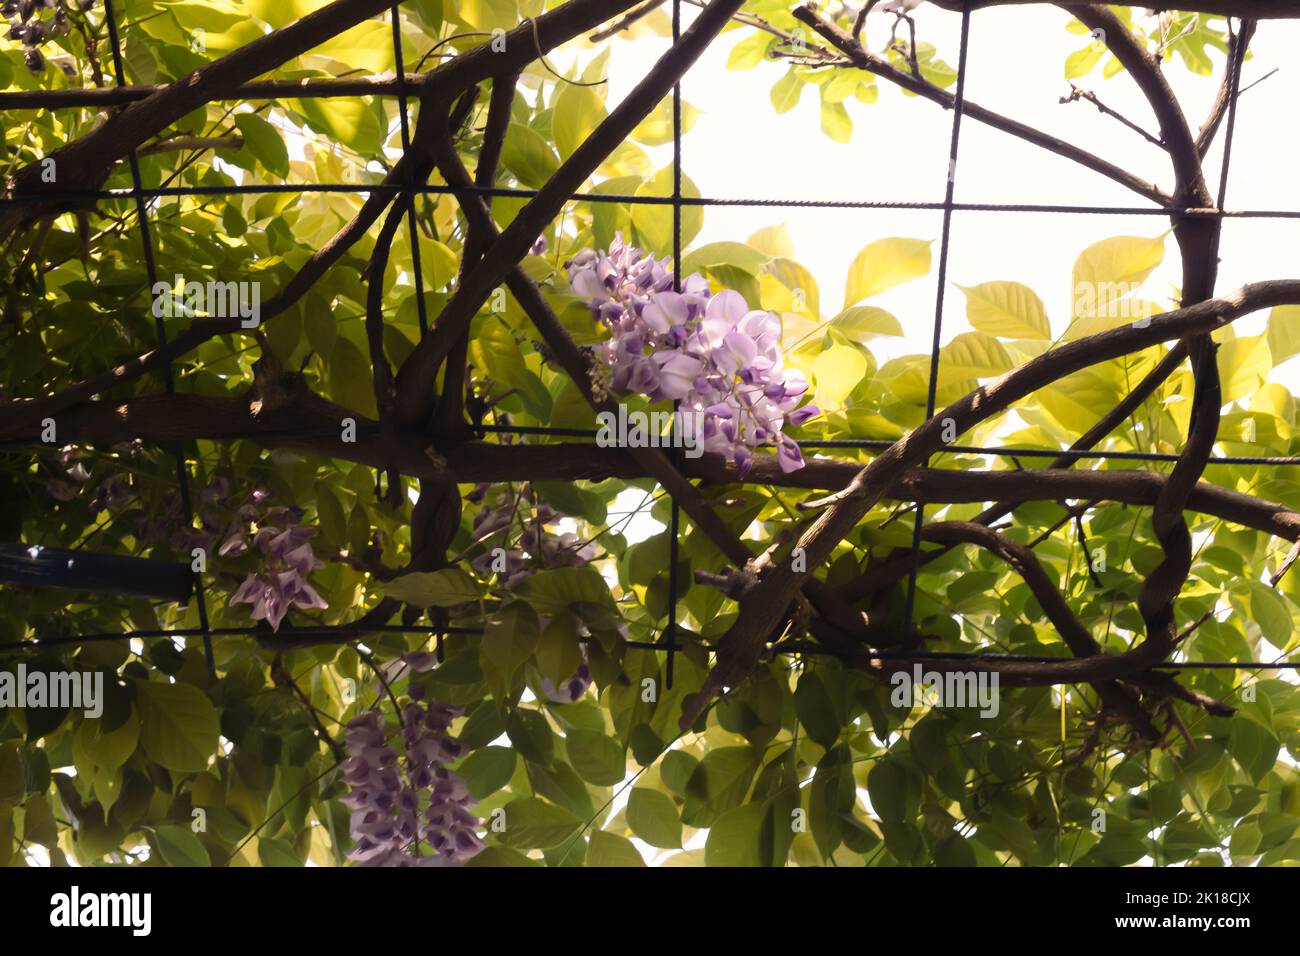 Purple blue wisteria flower with lots of green leaves on a sunny day. Creative background idea. Stock Photo